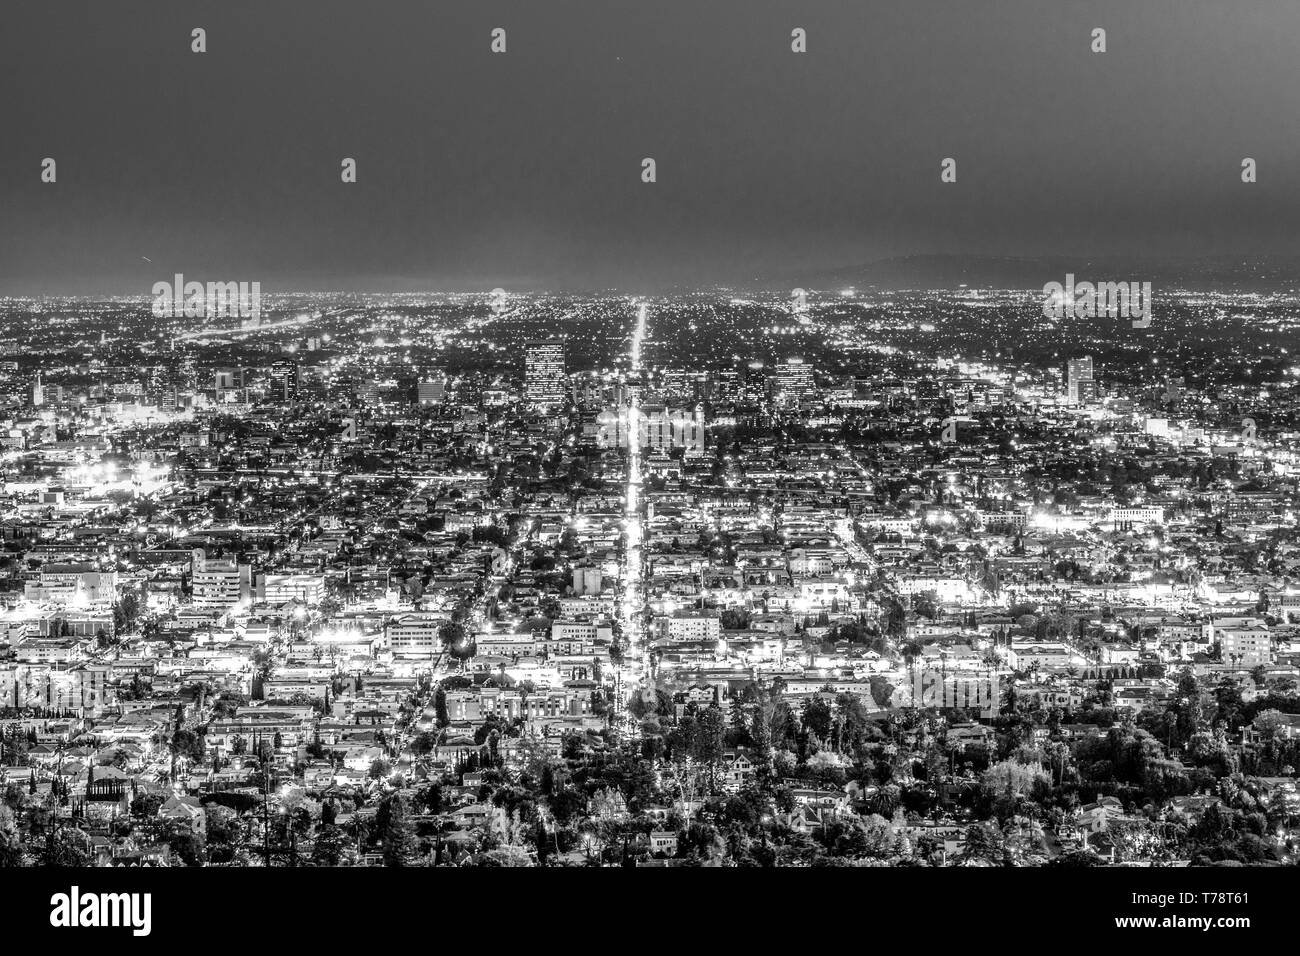 The citylights of Los Angeles by night - aerial view Stock Photo